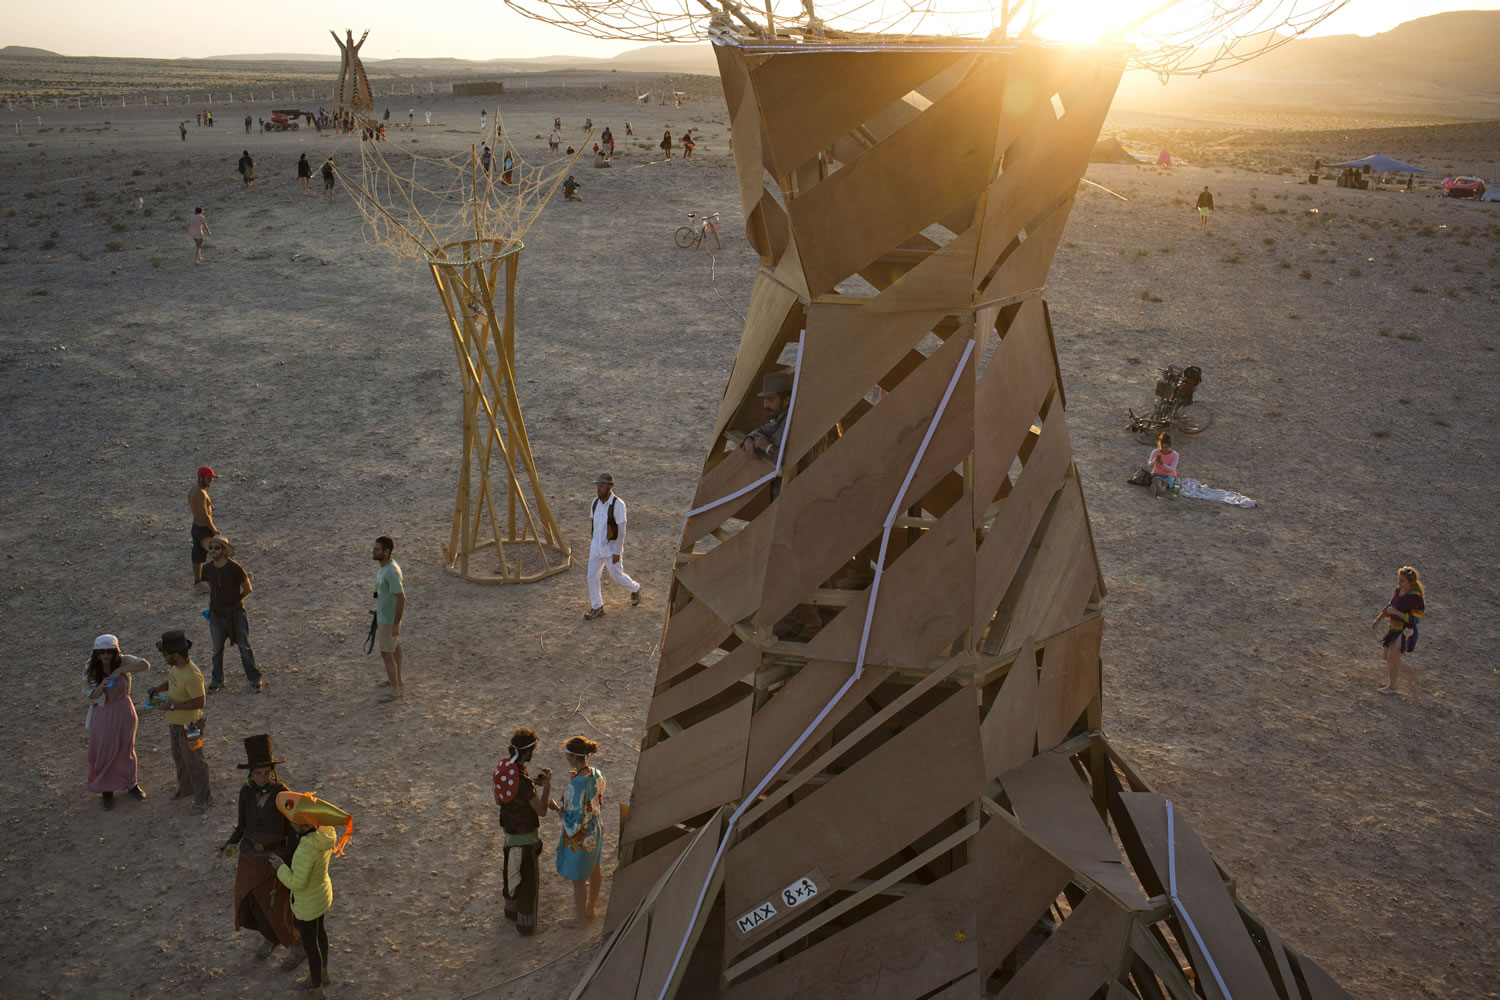 People, mostly Israelis, walk in the playa during Israel's first Midburn festival, modeled after the popular Burning Man festival held annually in the Black Rock Desert of Nevada, in the desert near the Israeli kibbutz of Sde Boker.